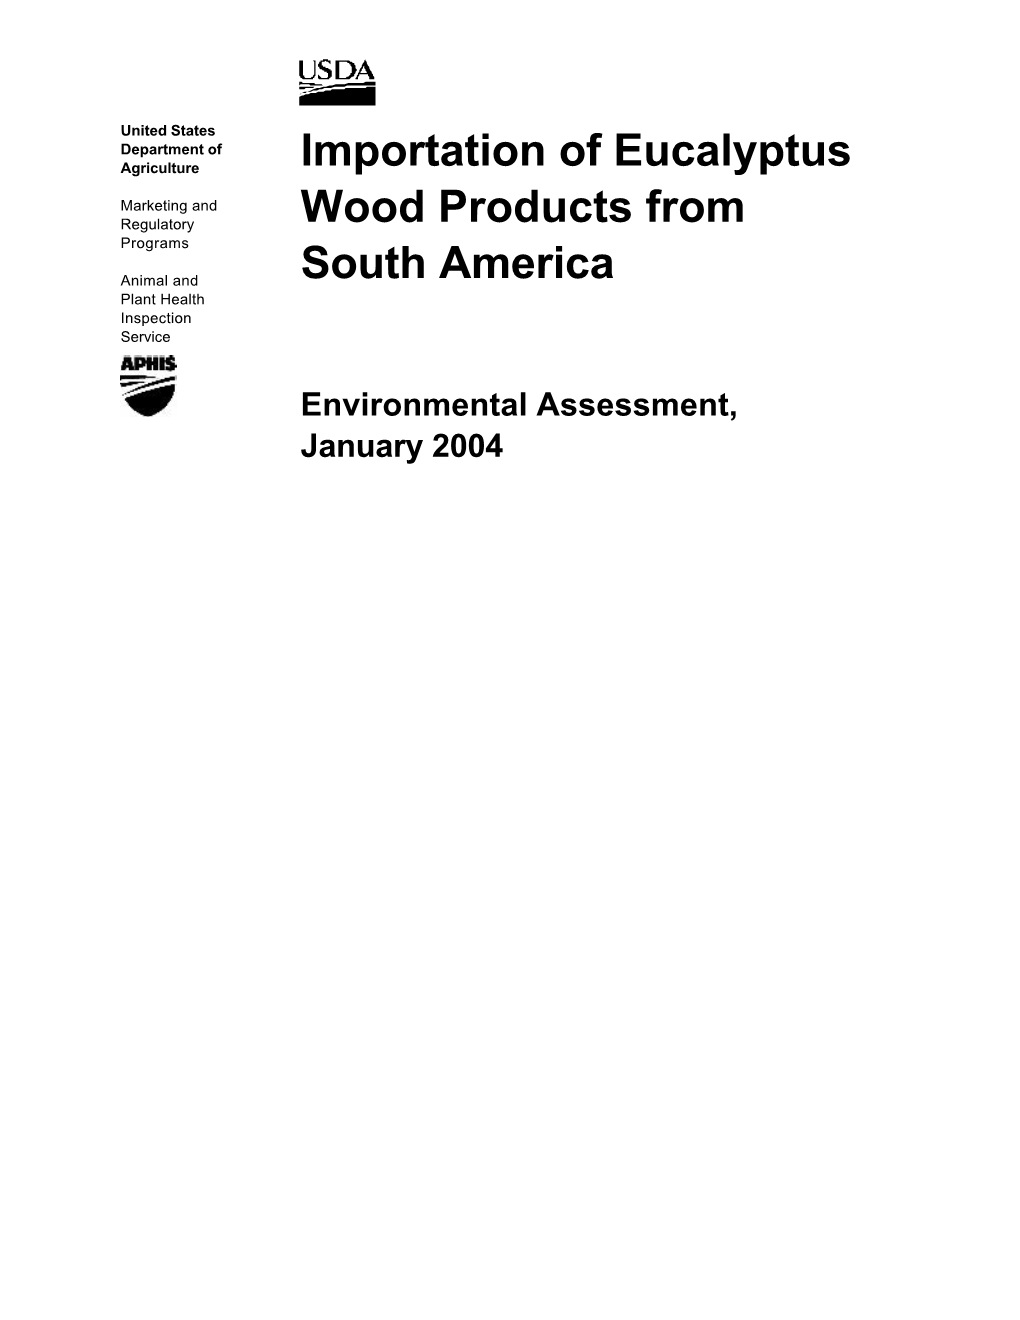 Importation of Eucalyptus Wood Products from South America